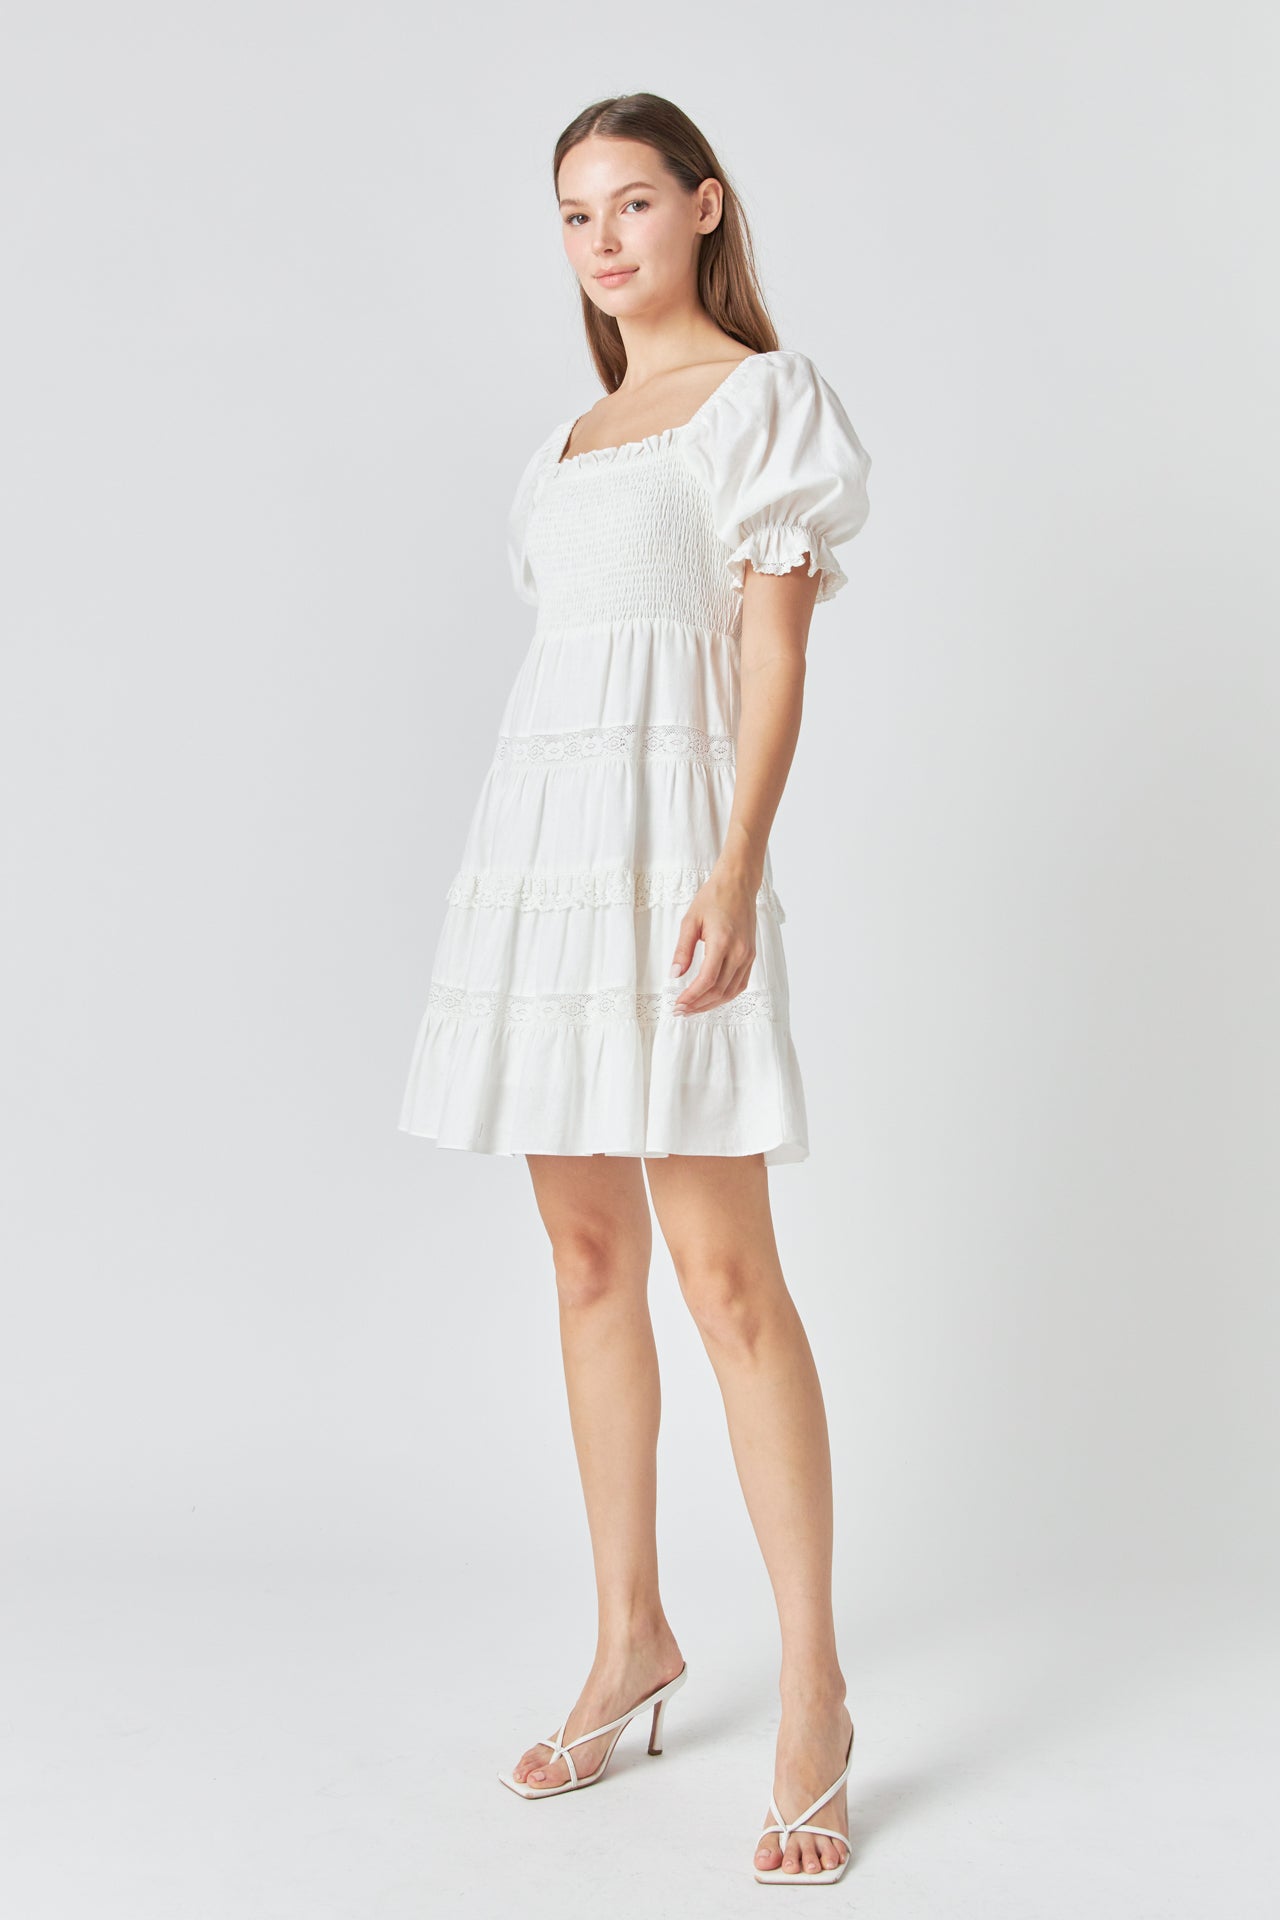 Linen Smocked Mini Dress with Lace